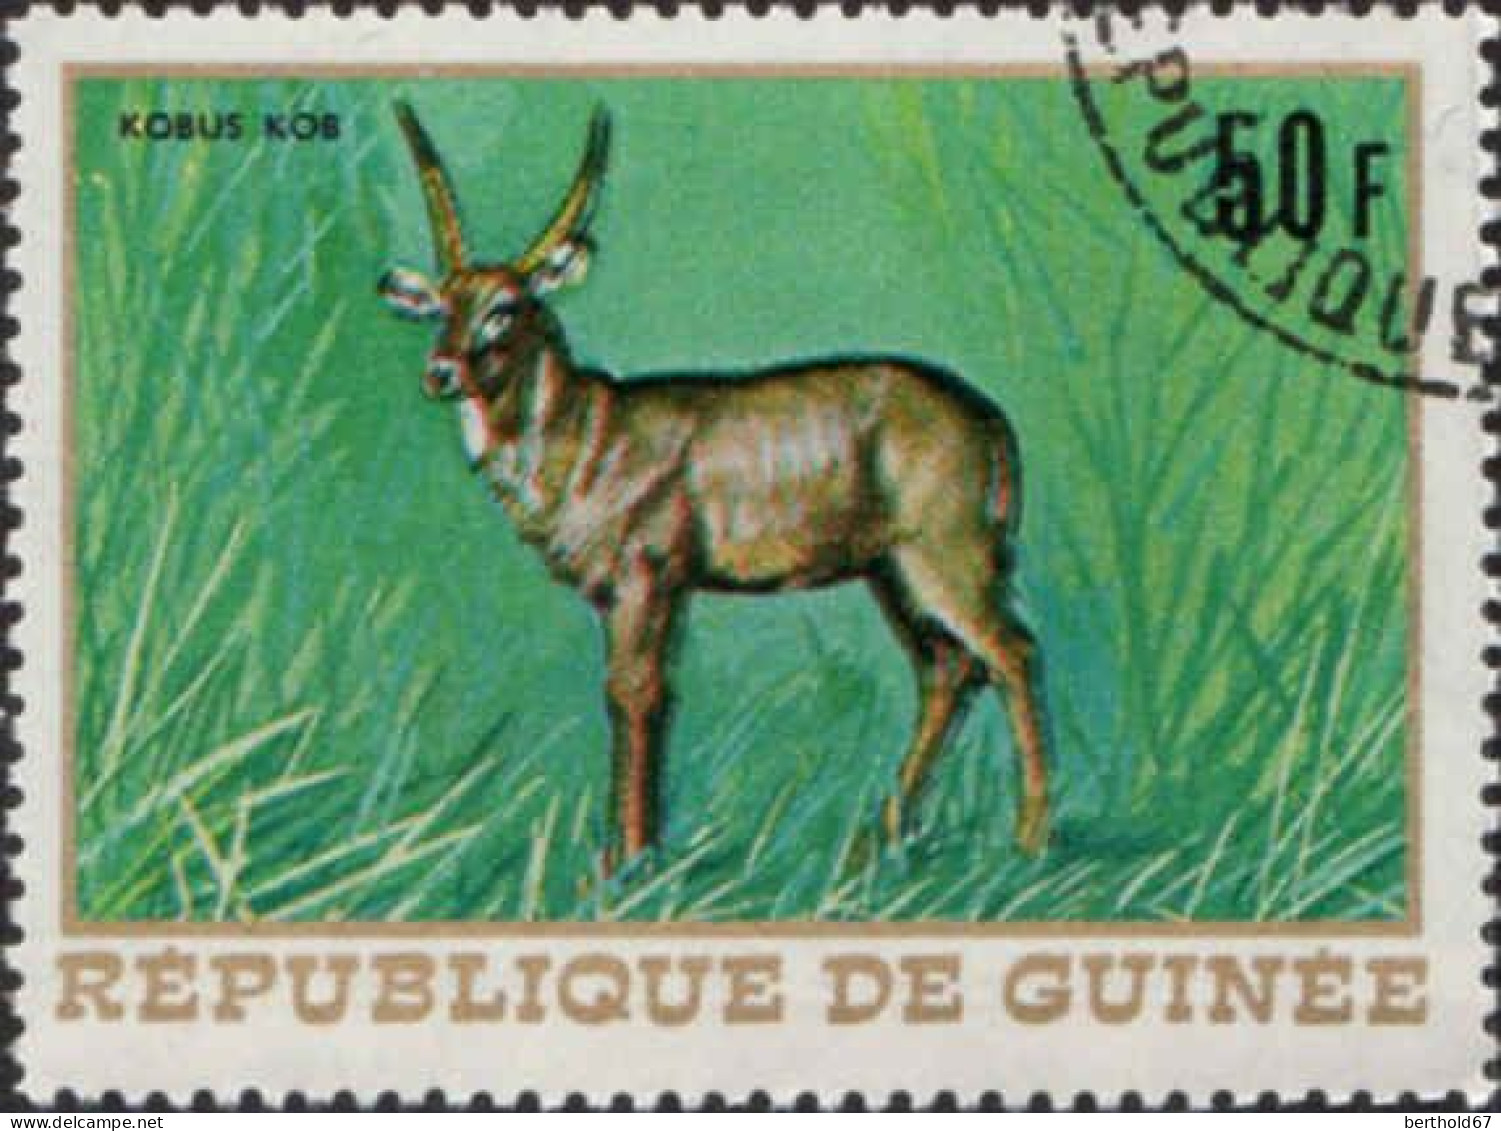 Guinée (Rep) Poste Obl Yv: 363/369 Faune africaine (Beau cachet rond)